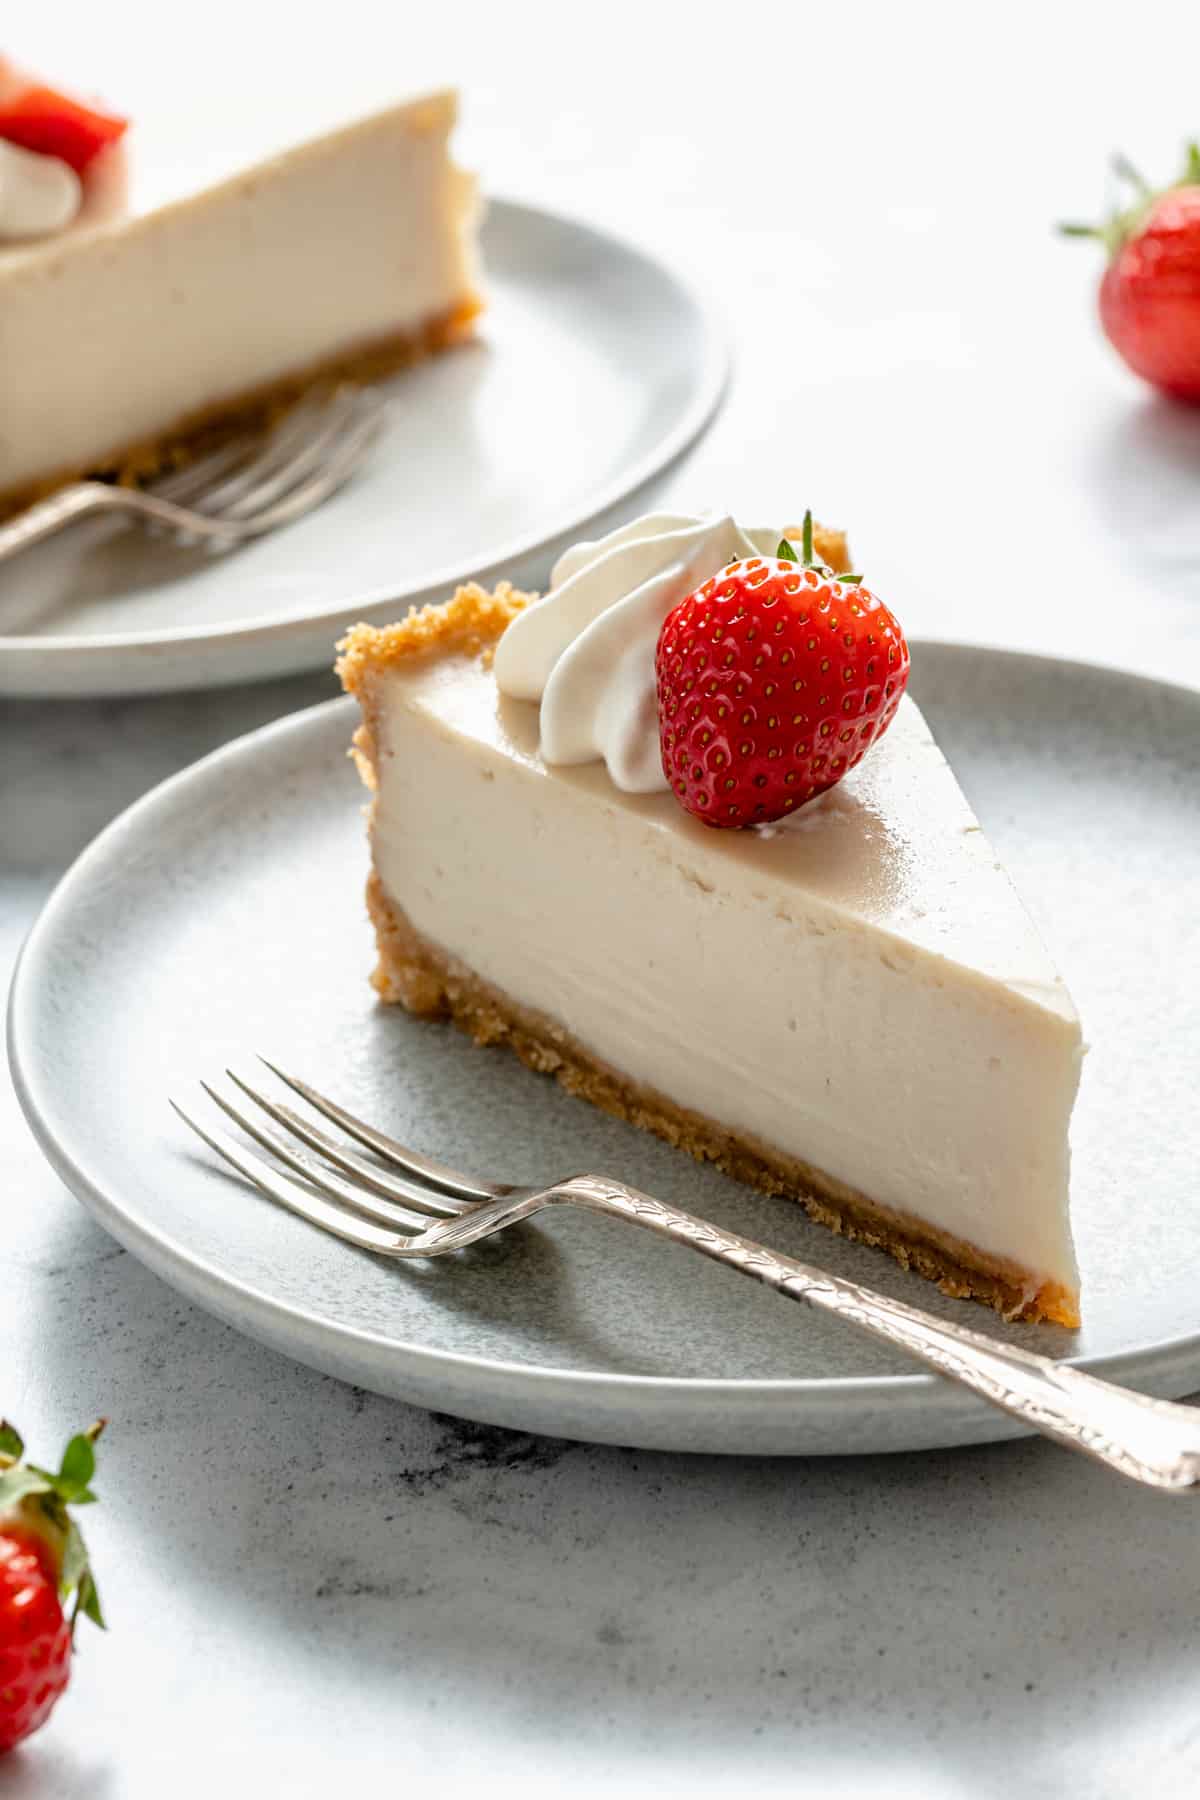 Slice of vegan cheesecake on a plate.